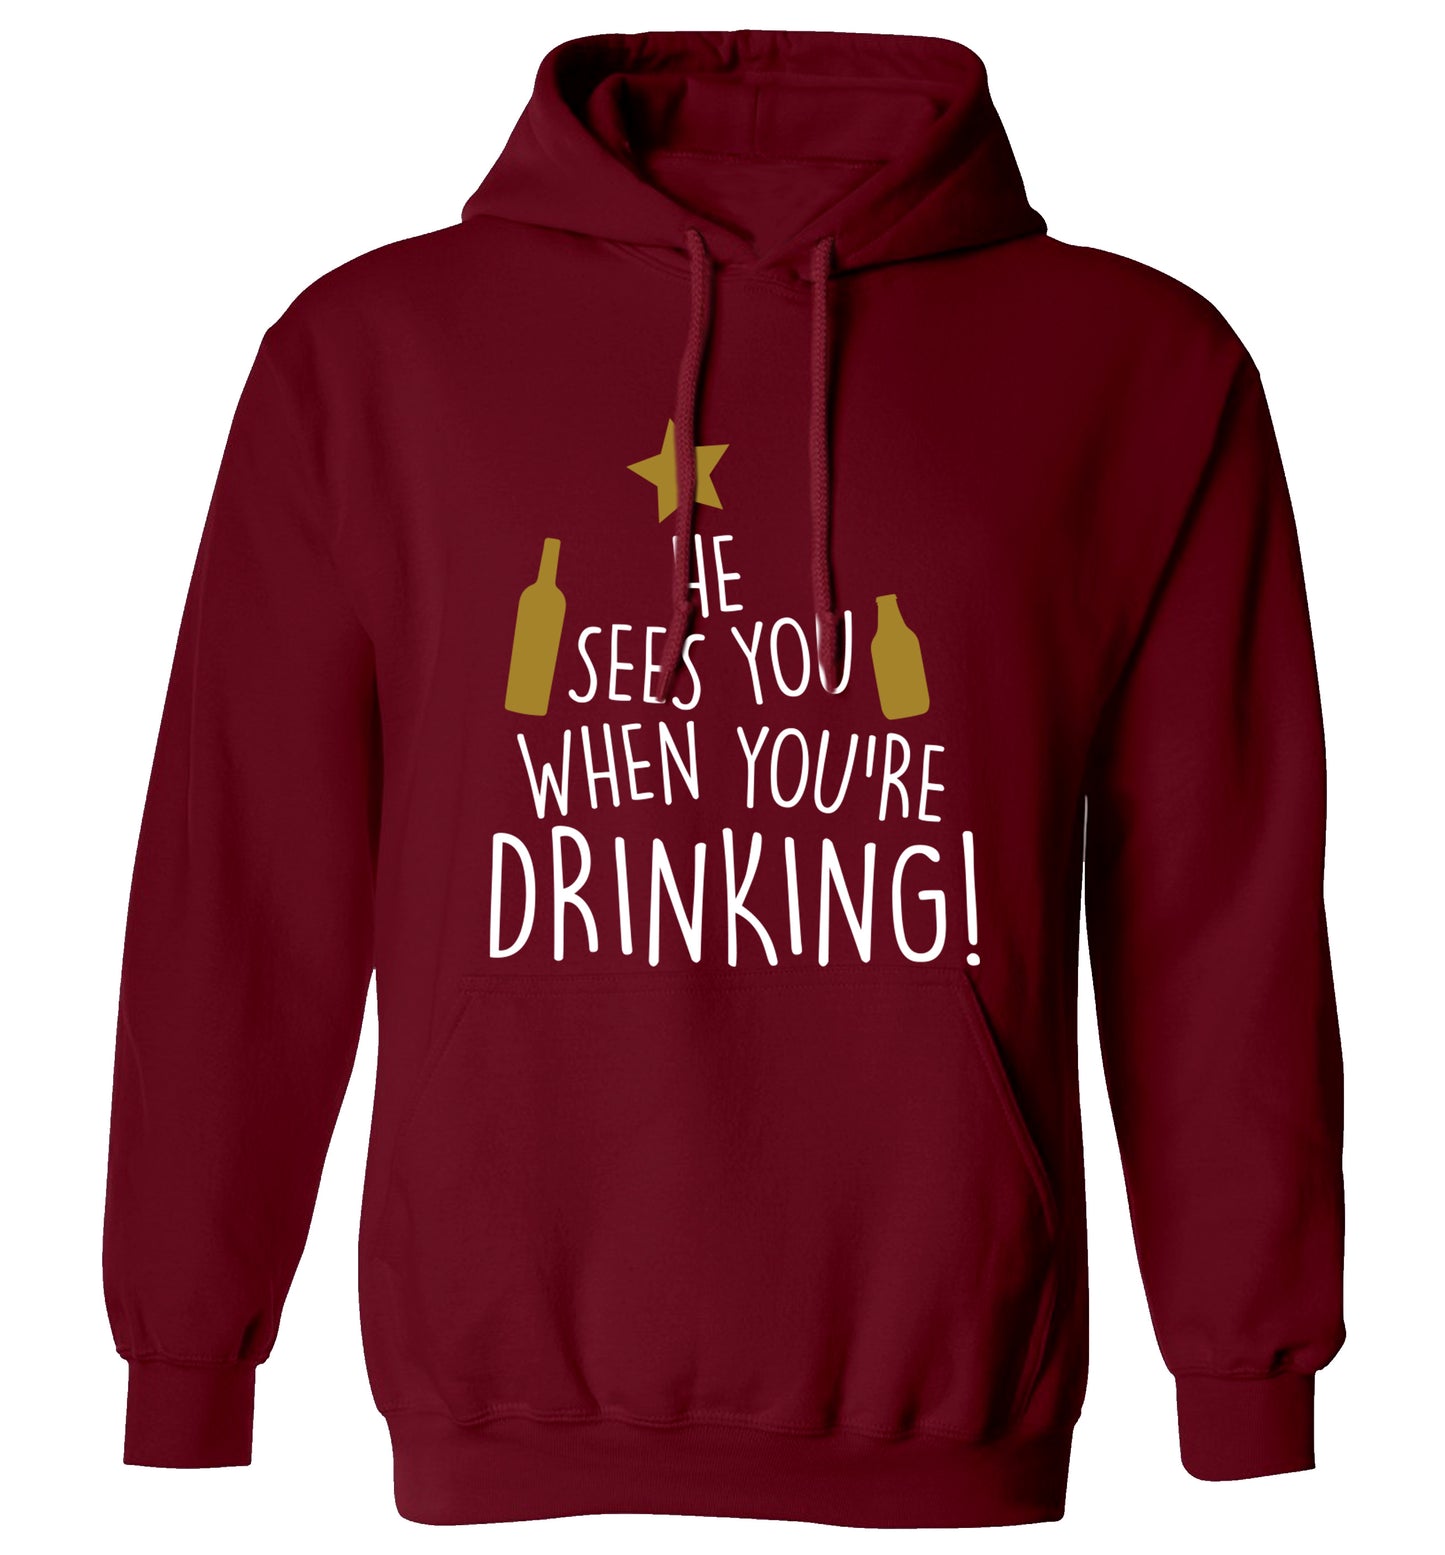 He sees you when you're drinking adults unisex maroon hoodie 2XL